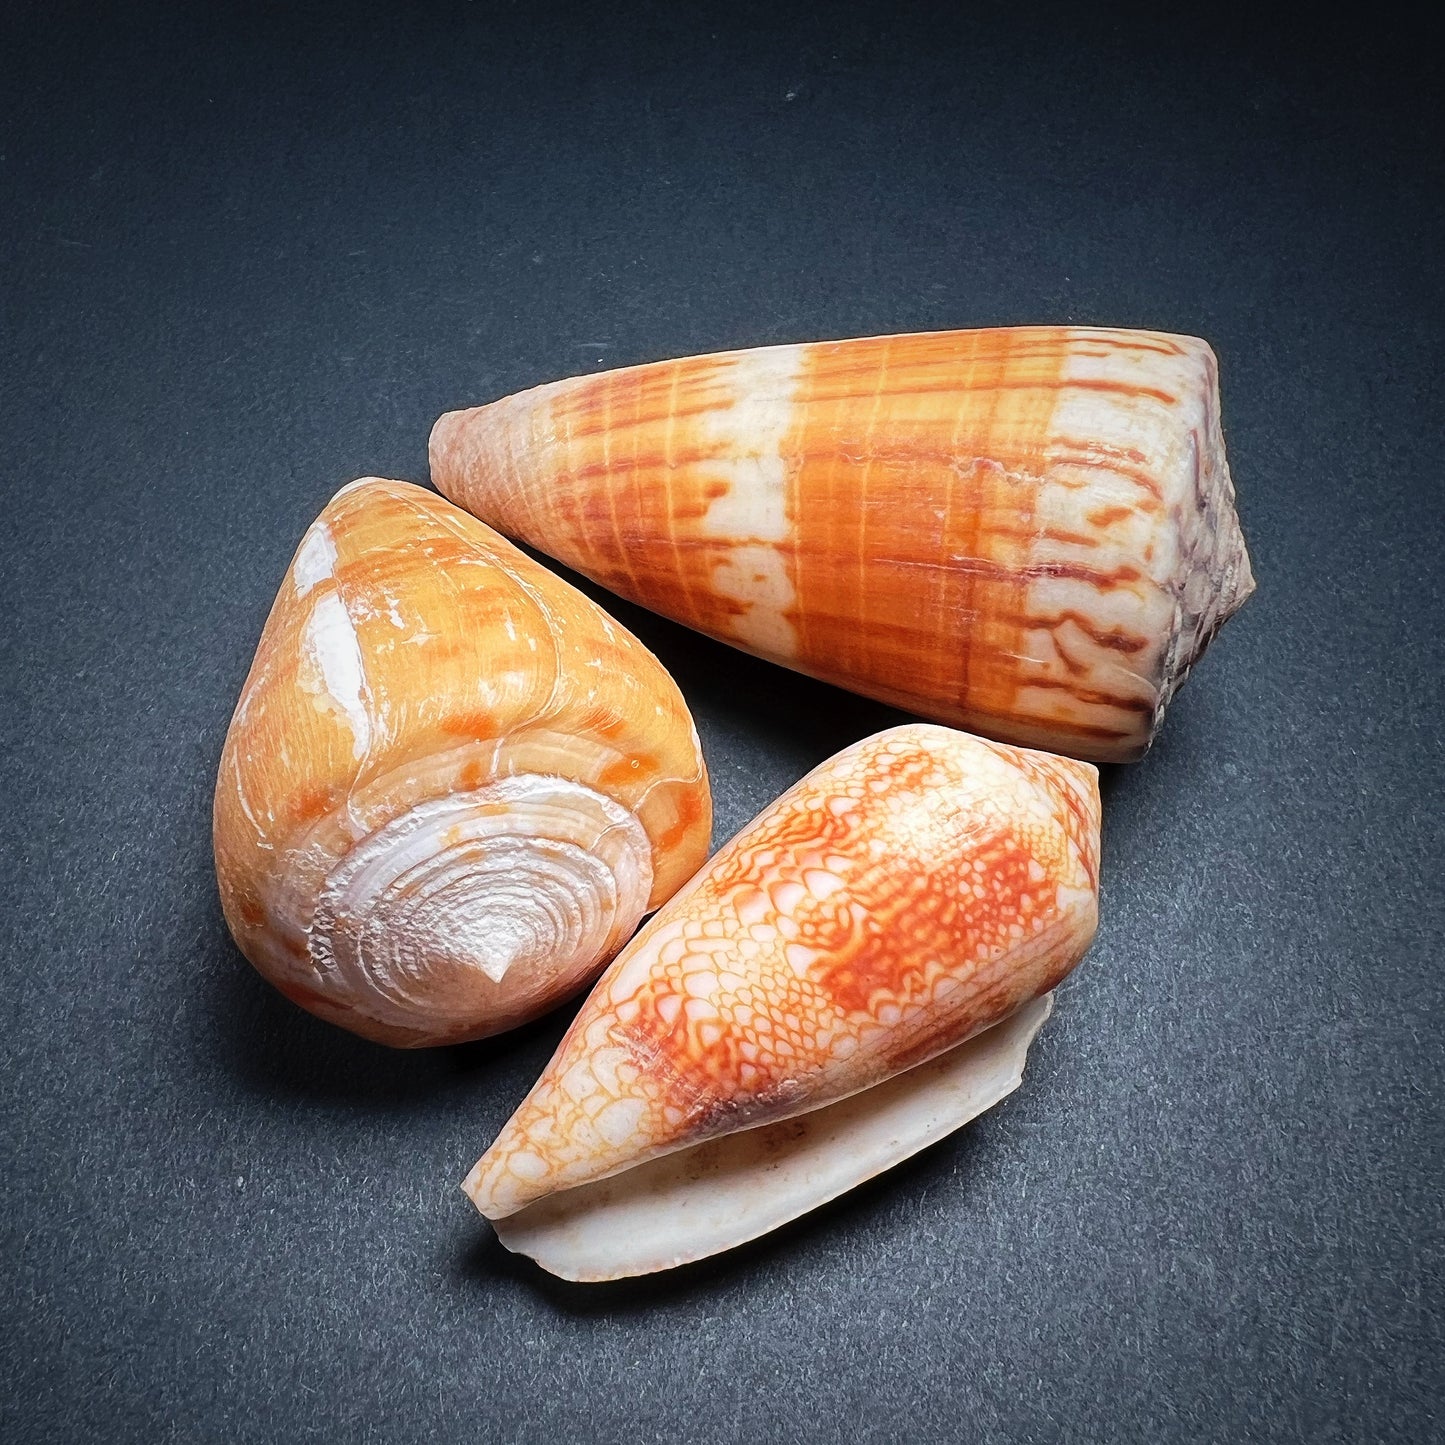 Conch shell - Conidae, M size